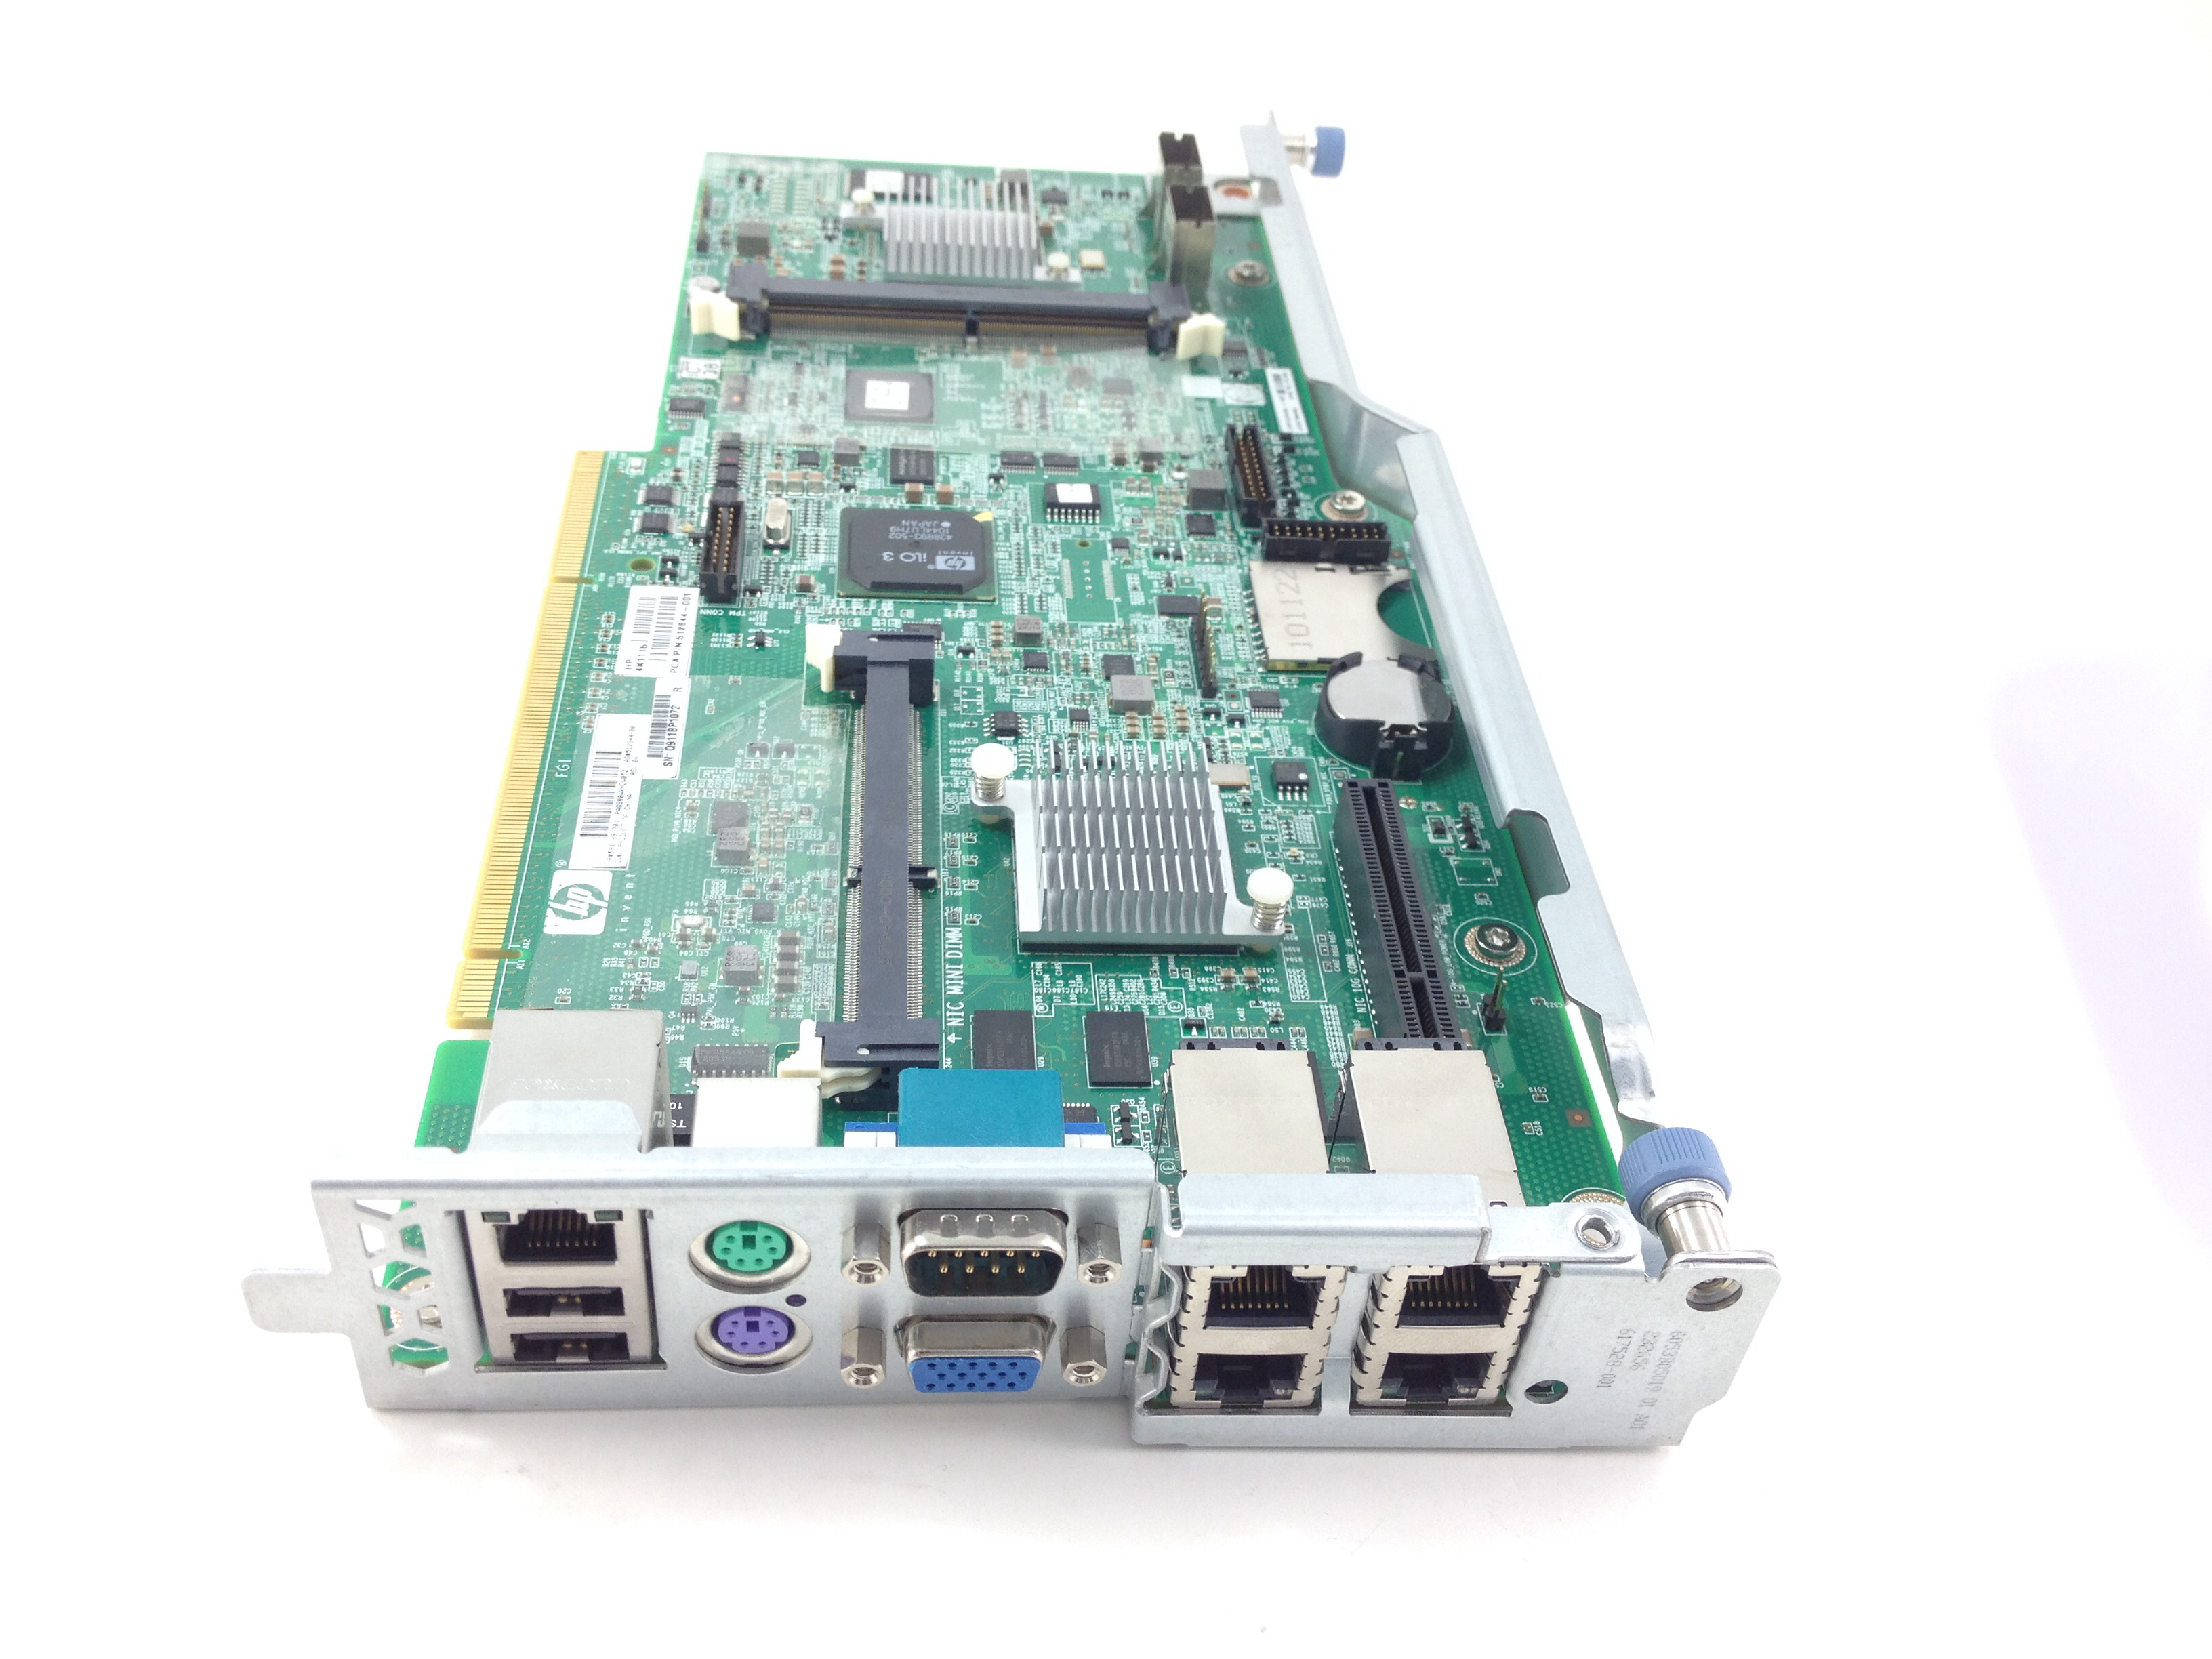 HP Proliant DL580 G7 Server System Peripheral Interface Board (591199-001)